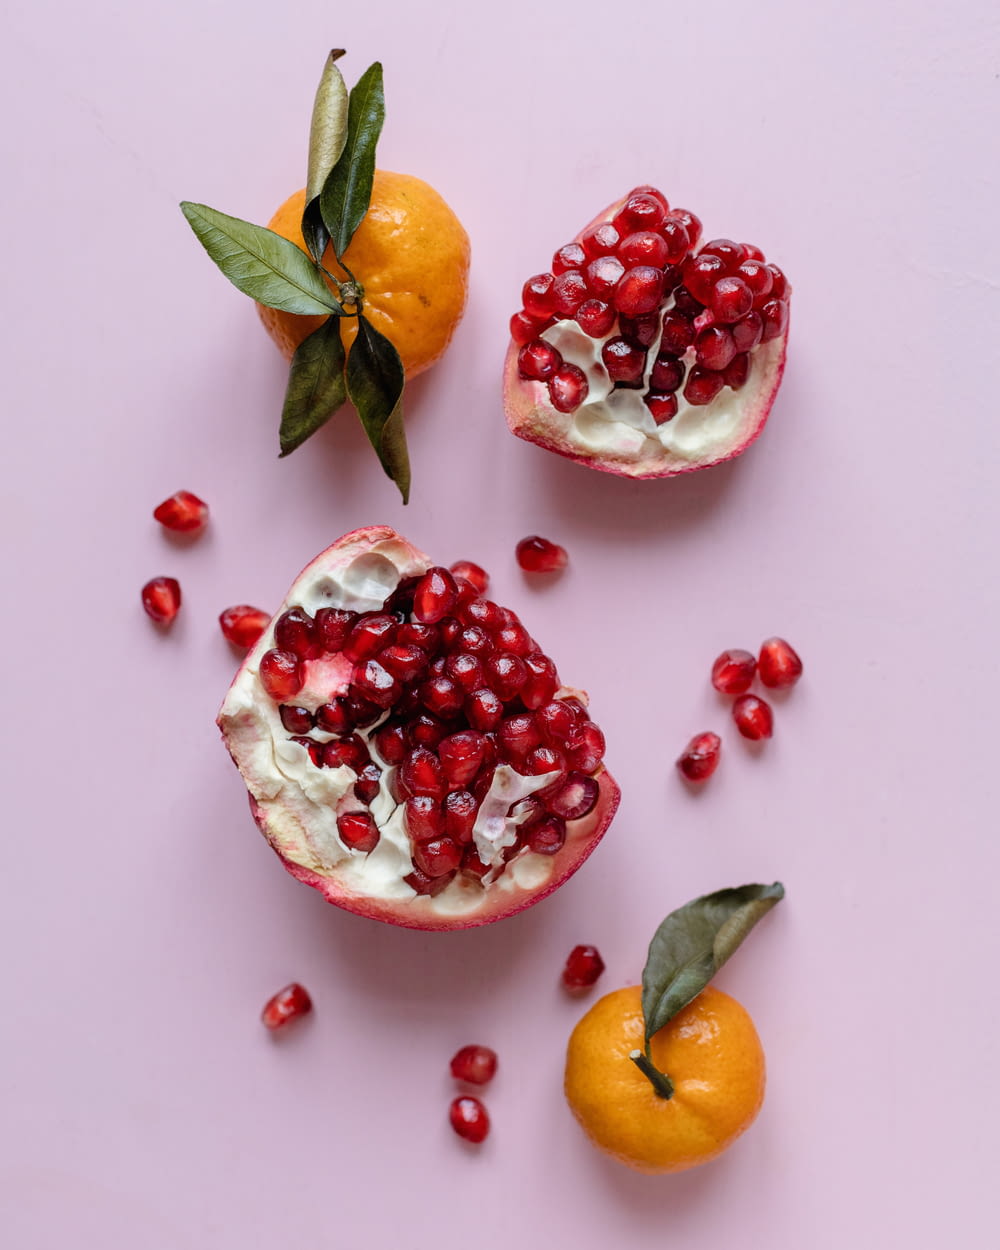 pomegranates and oranges on a pink surface